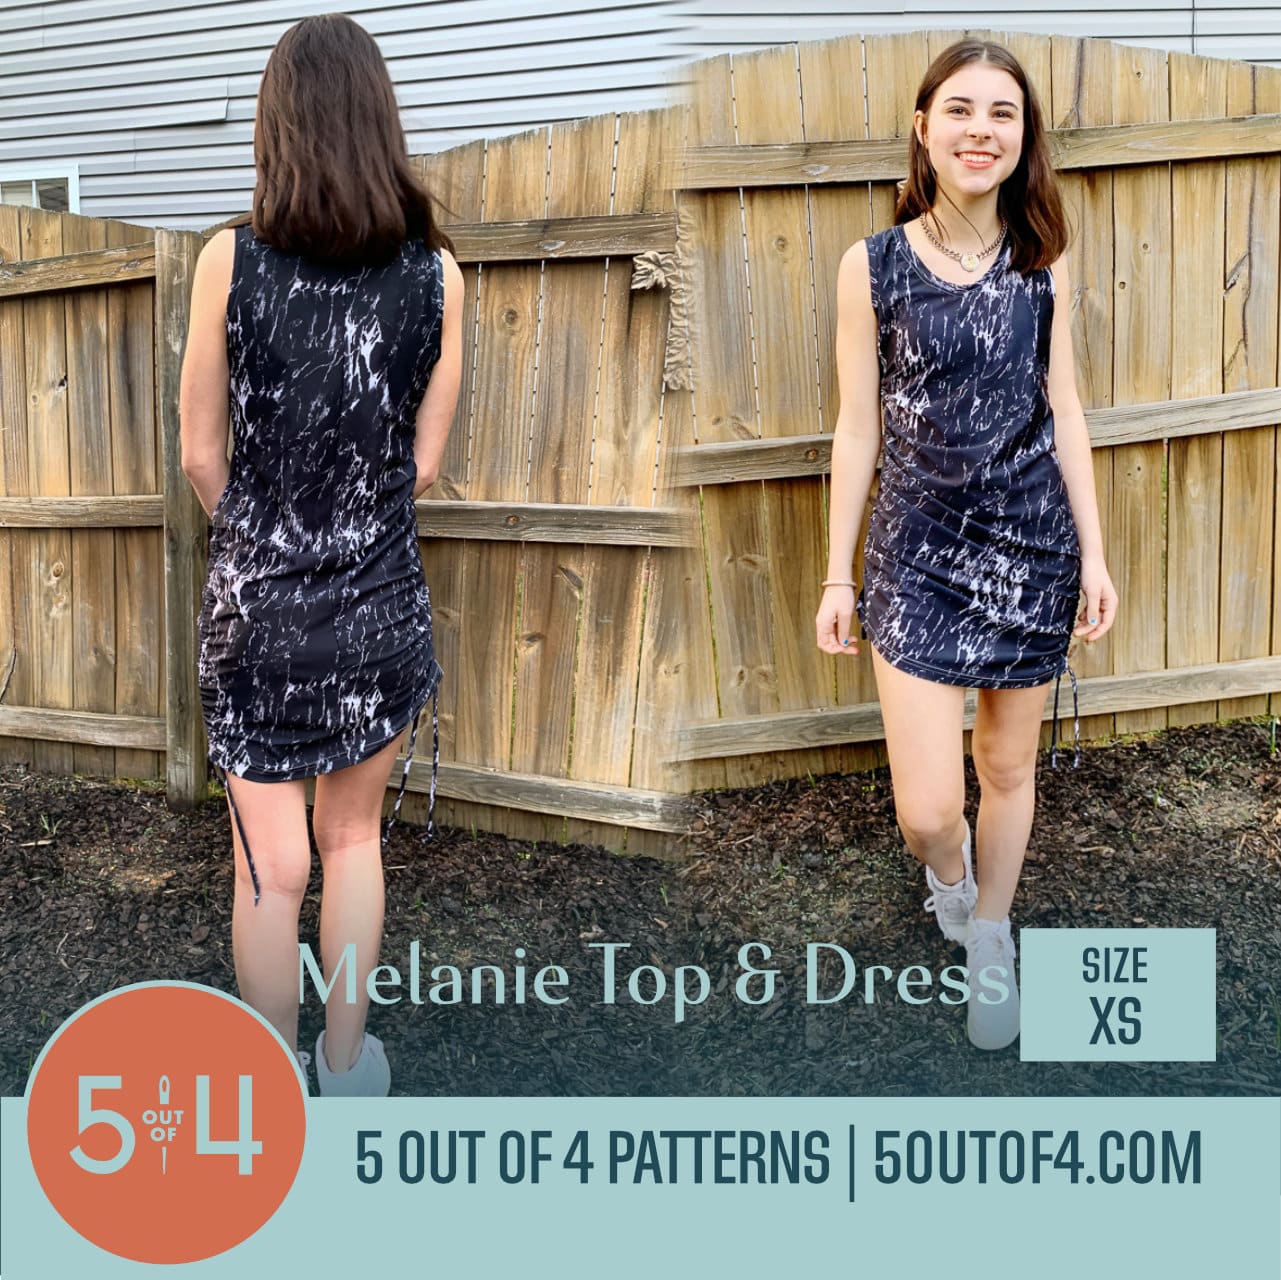 That Pattern Cost How Much? Most Expensive Sewing Patterns - Melly